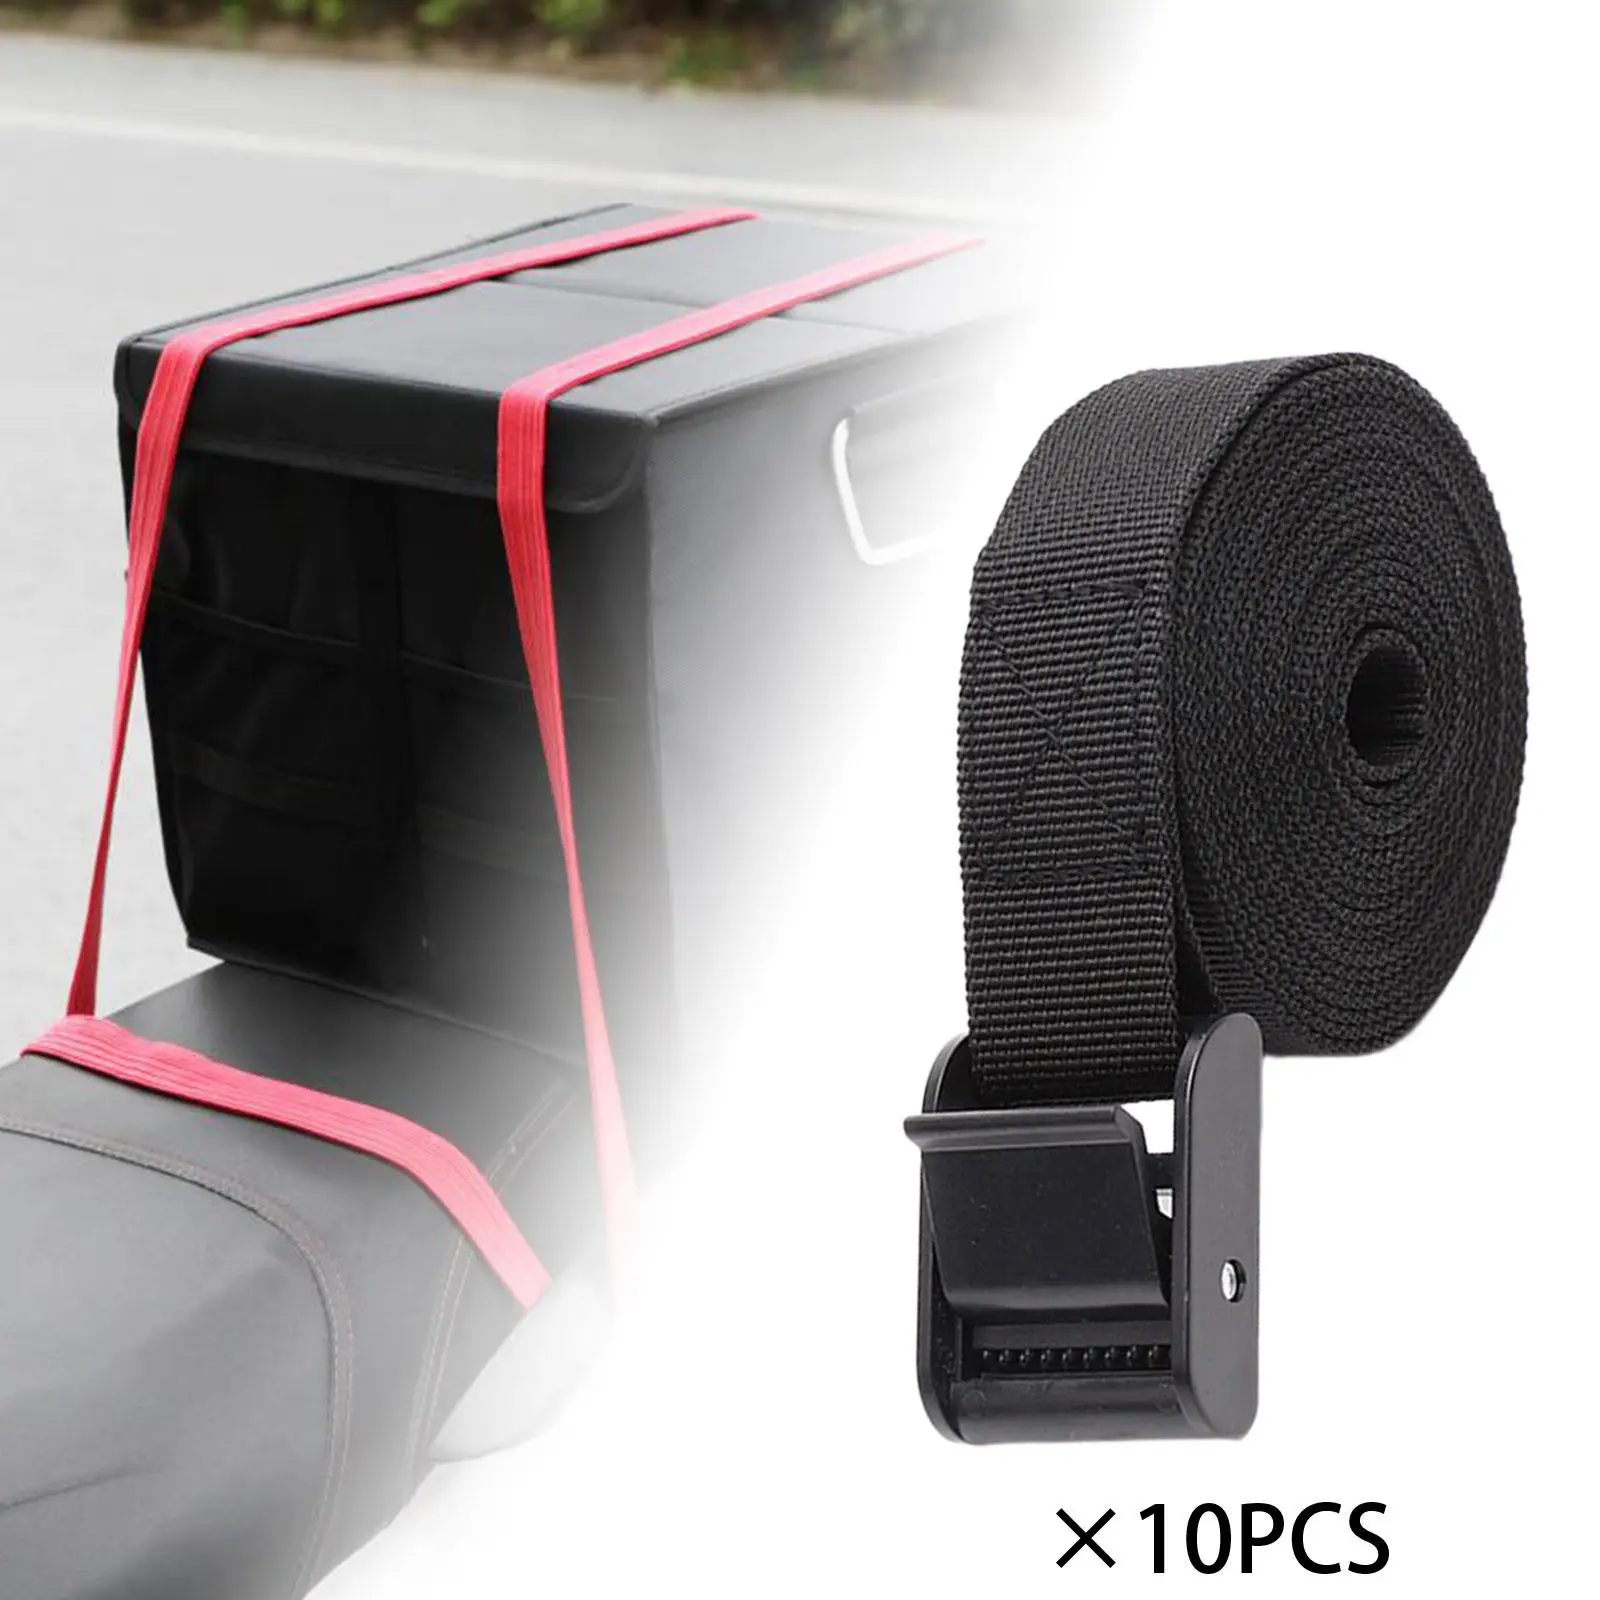 10Pcs Lashing Straps Tie Down Straps 1inchx19.7inch Quick Release Buckle Lightweight Logistic Cargo Straps for Car Truck